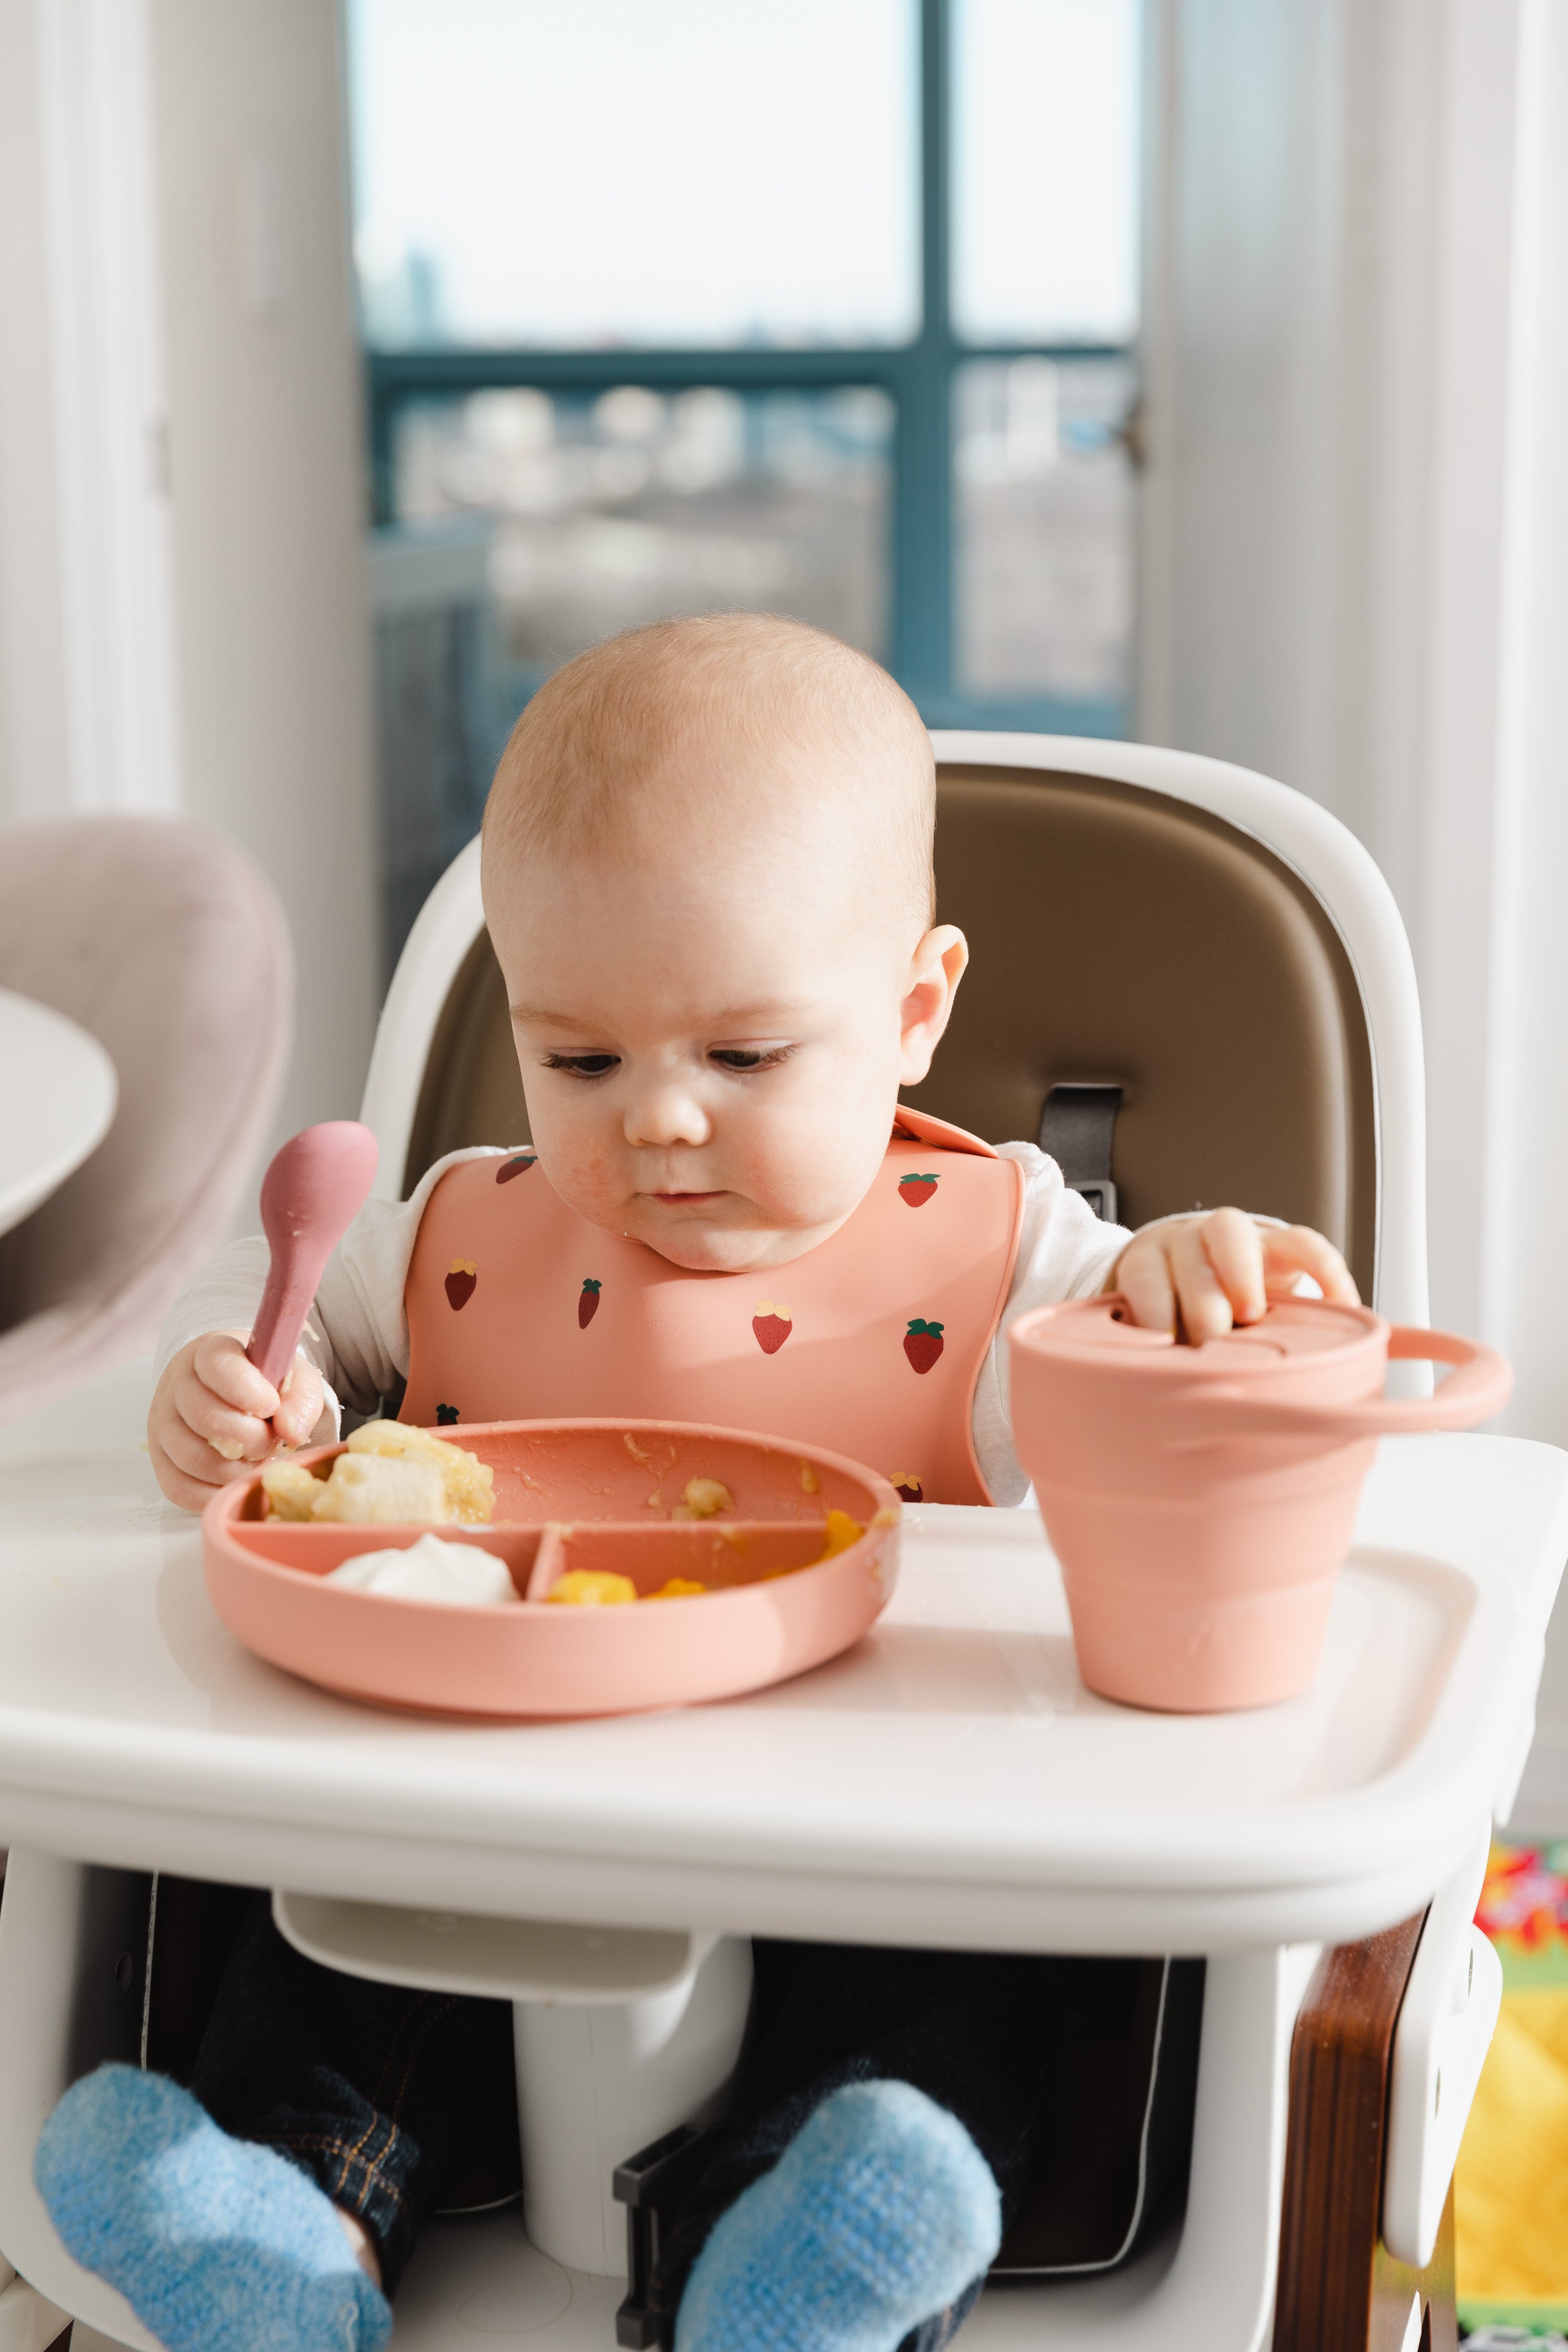 10 Tips to Encourage your Toddler to Self Feed